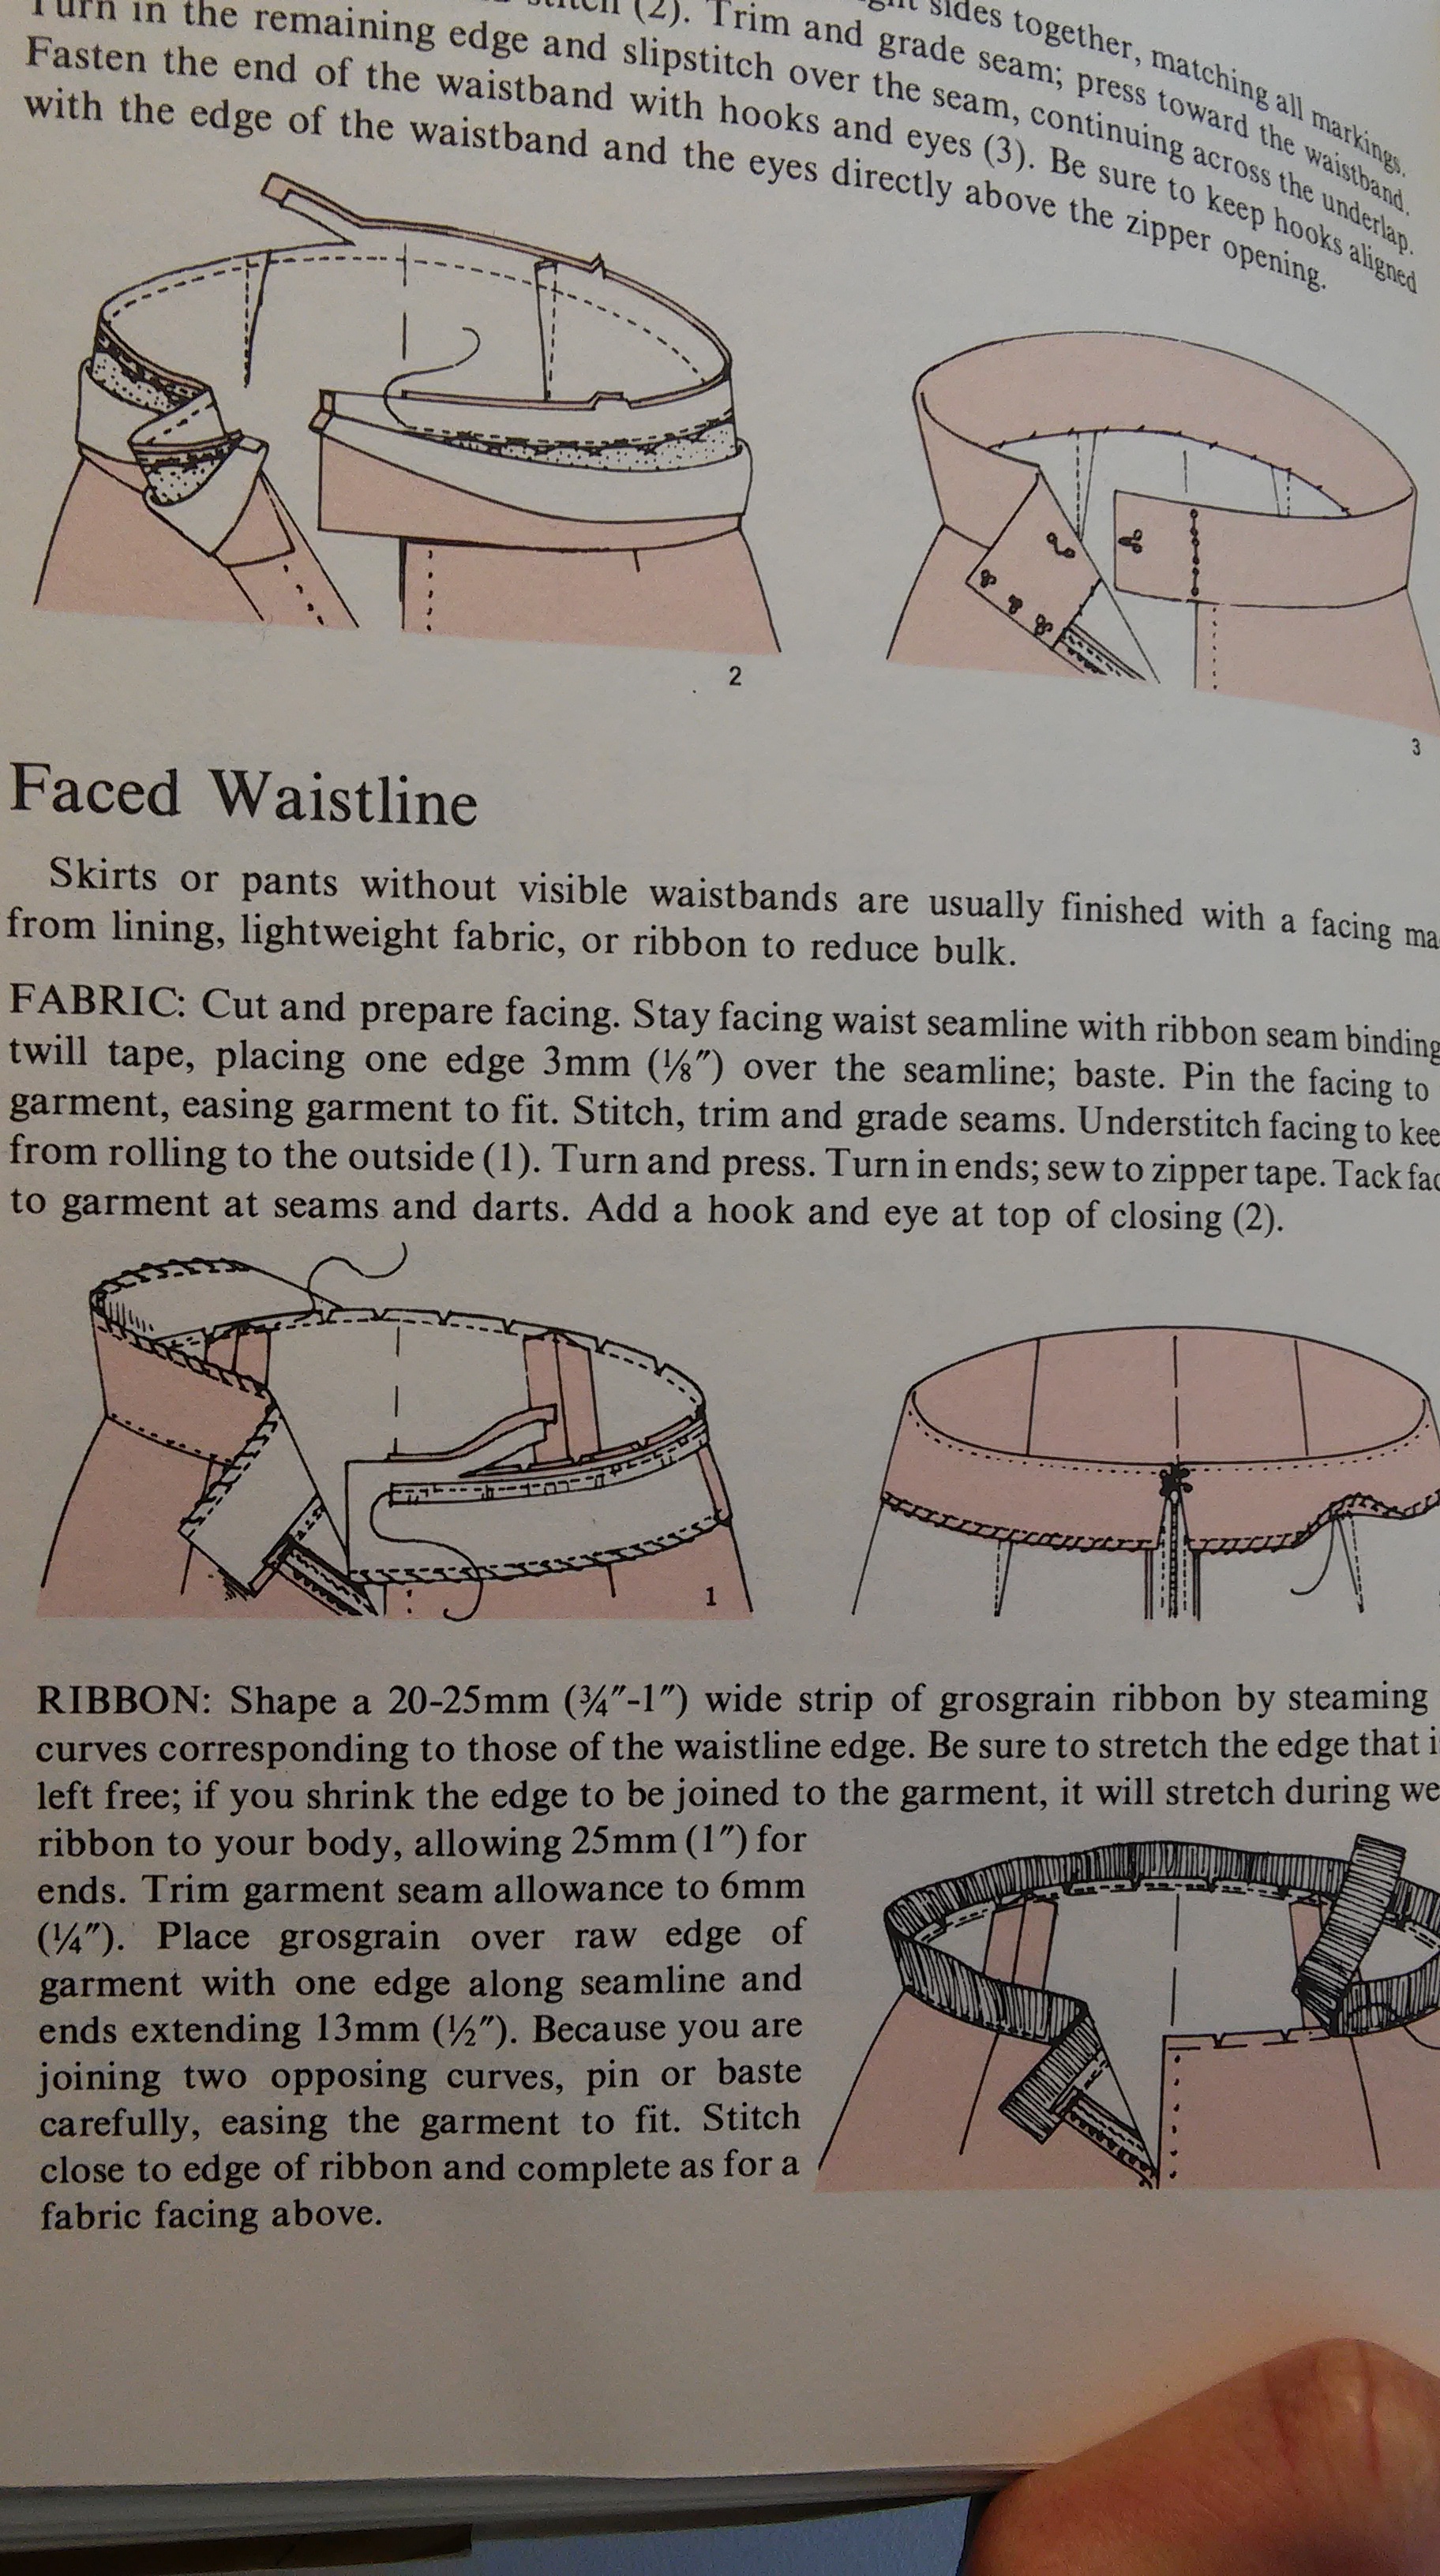 illustrations of how to sew a petersham faced waistband in drawings with text